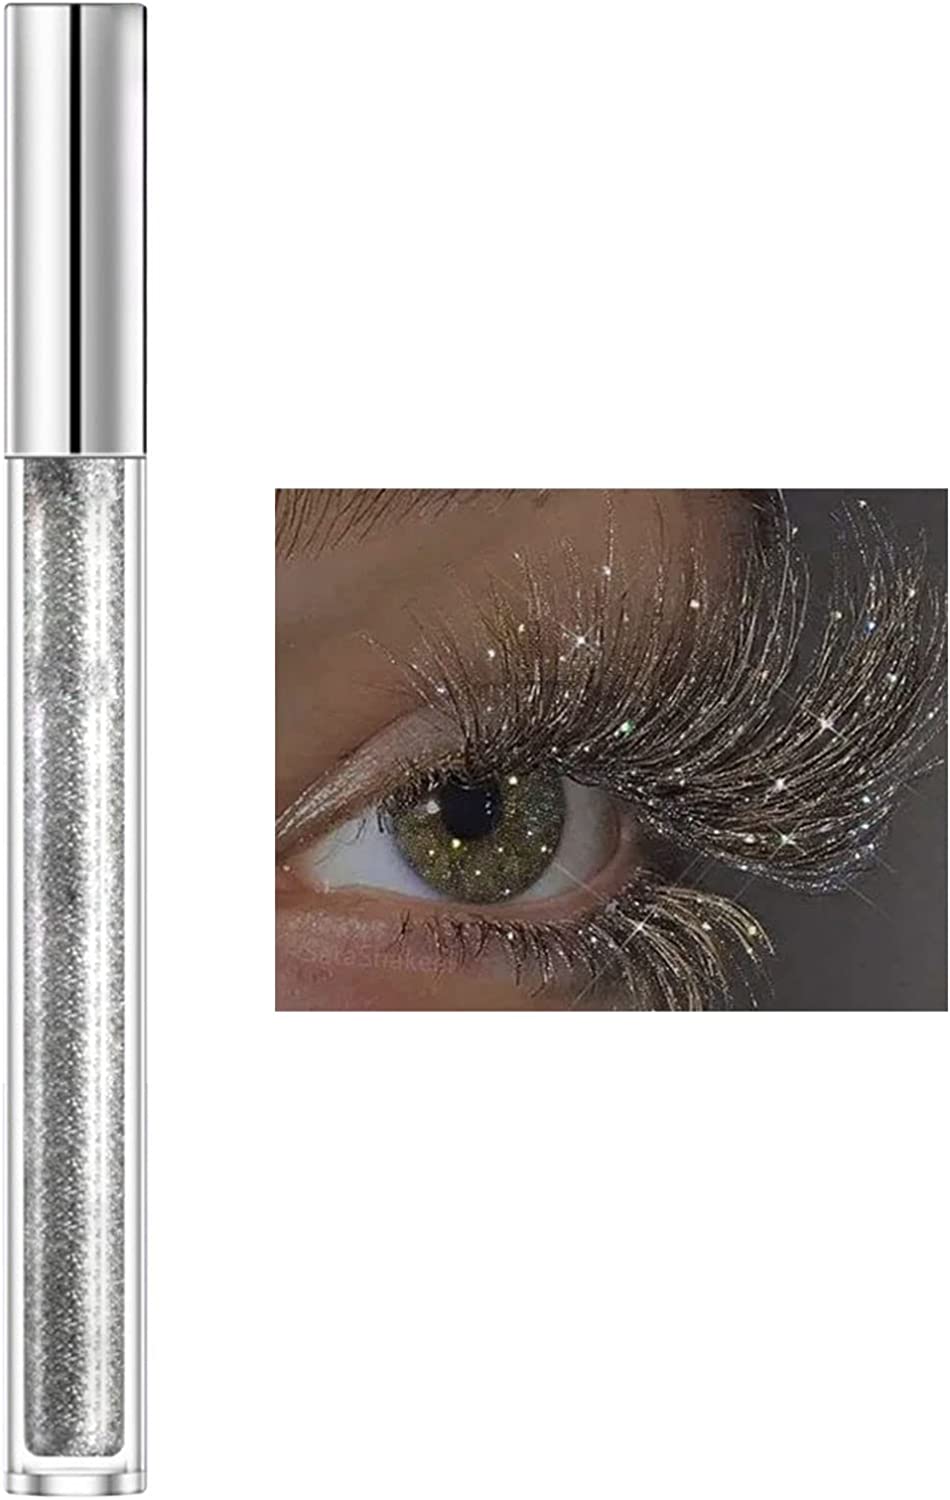 Glitter Mascara Sparkling Diamond Mascara Waterproof Long Lasting Thickening And Lengthening Eyelashes Makeup For Party Weddings Crystal Shattered Color Mascara (A, One Size)